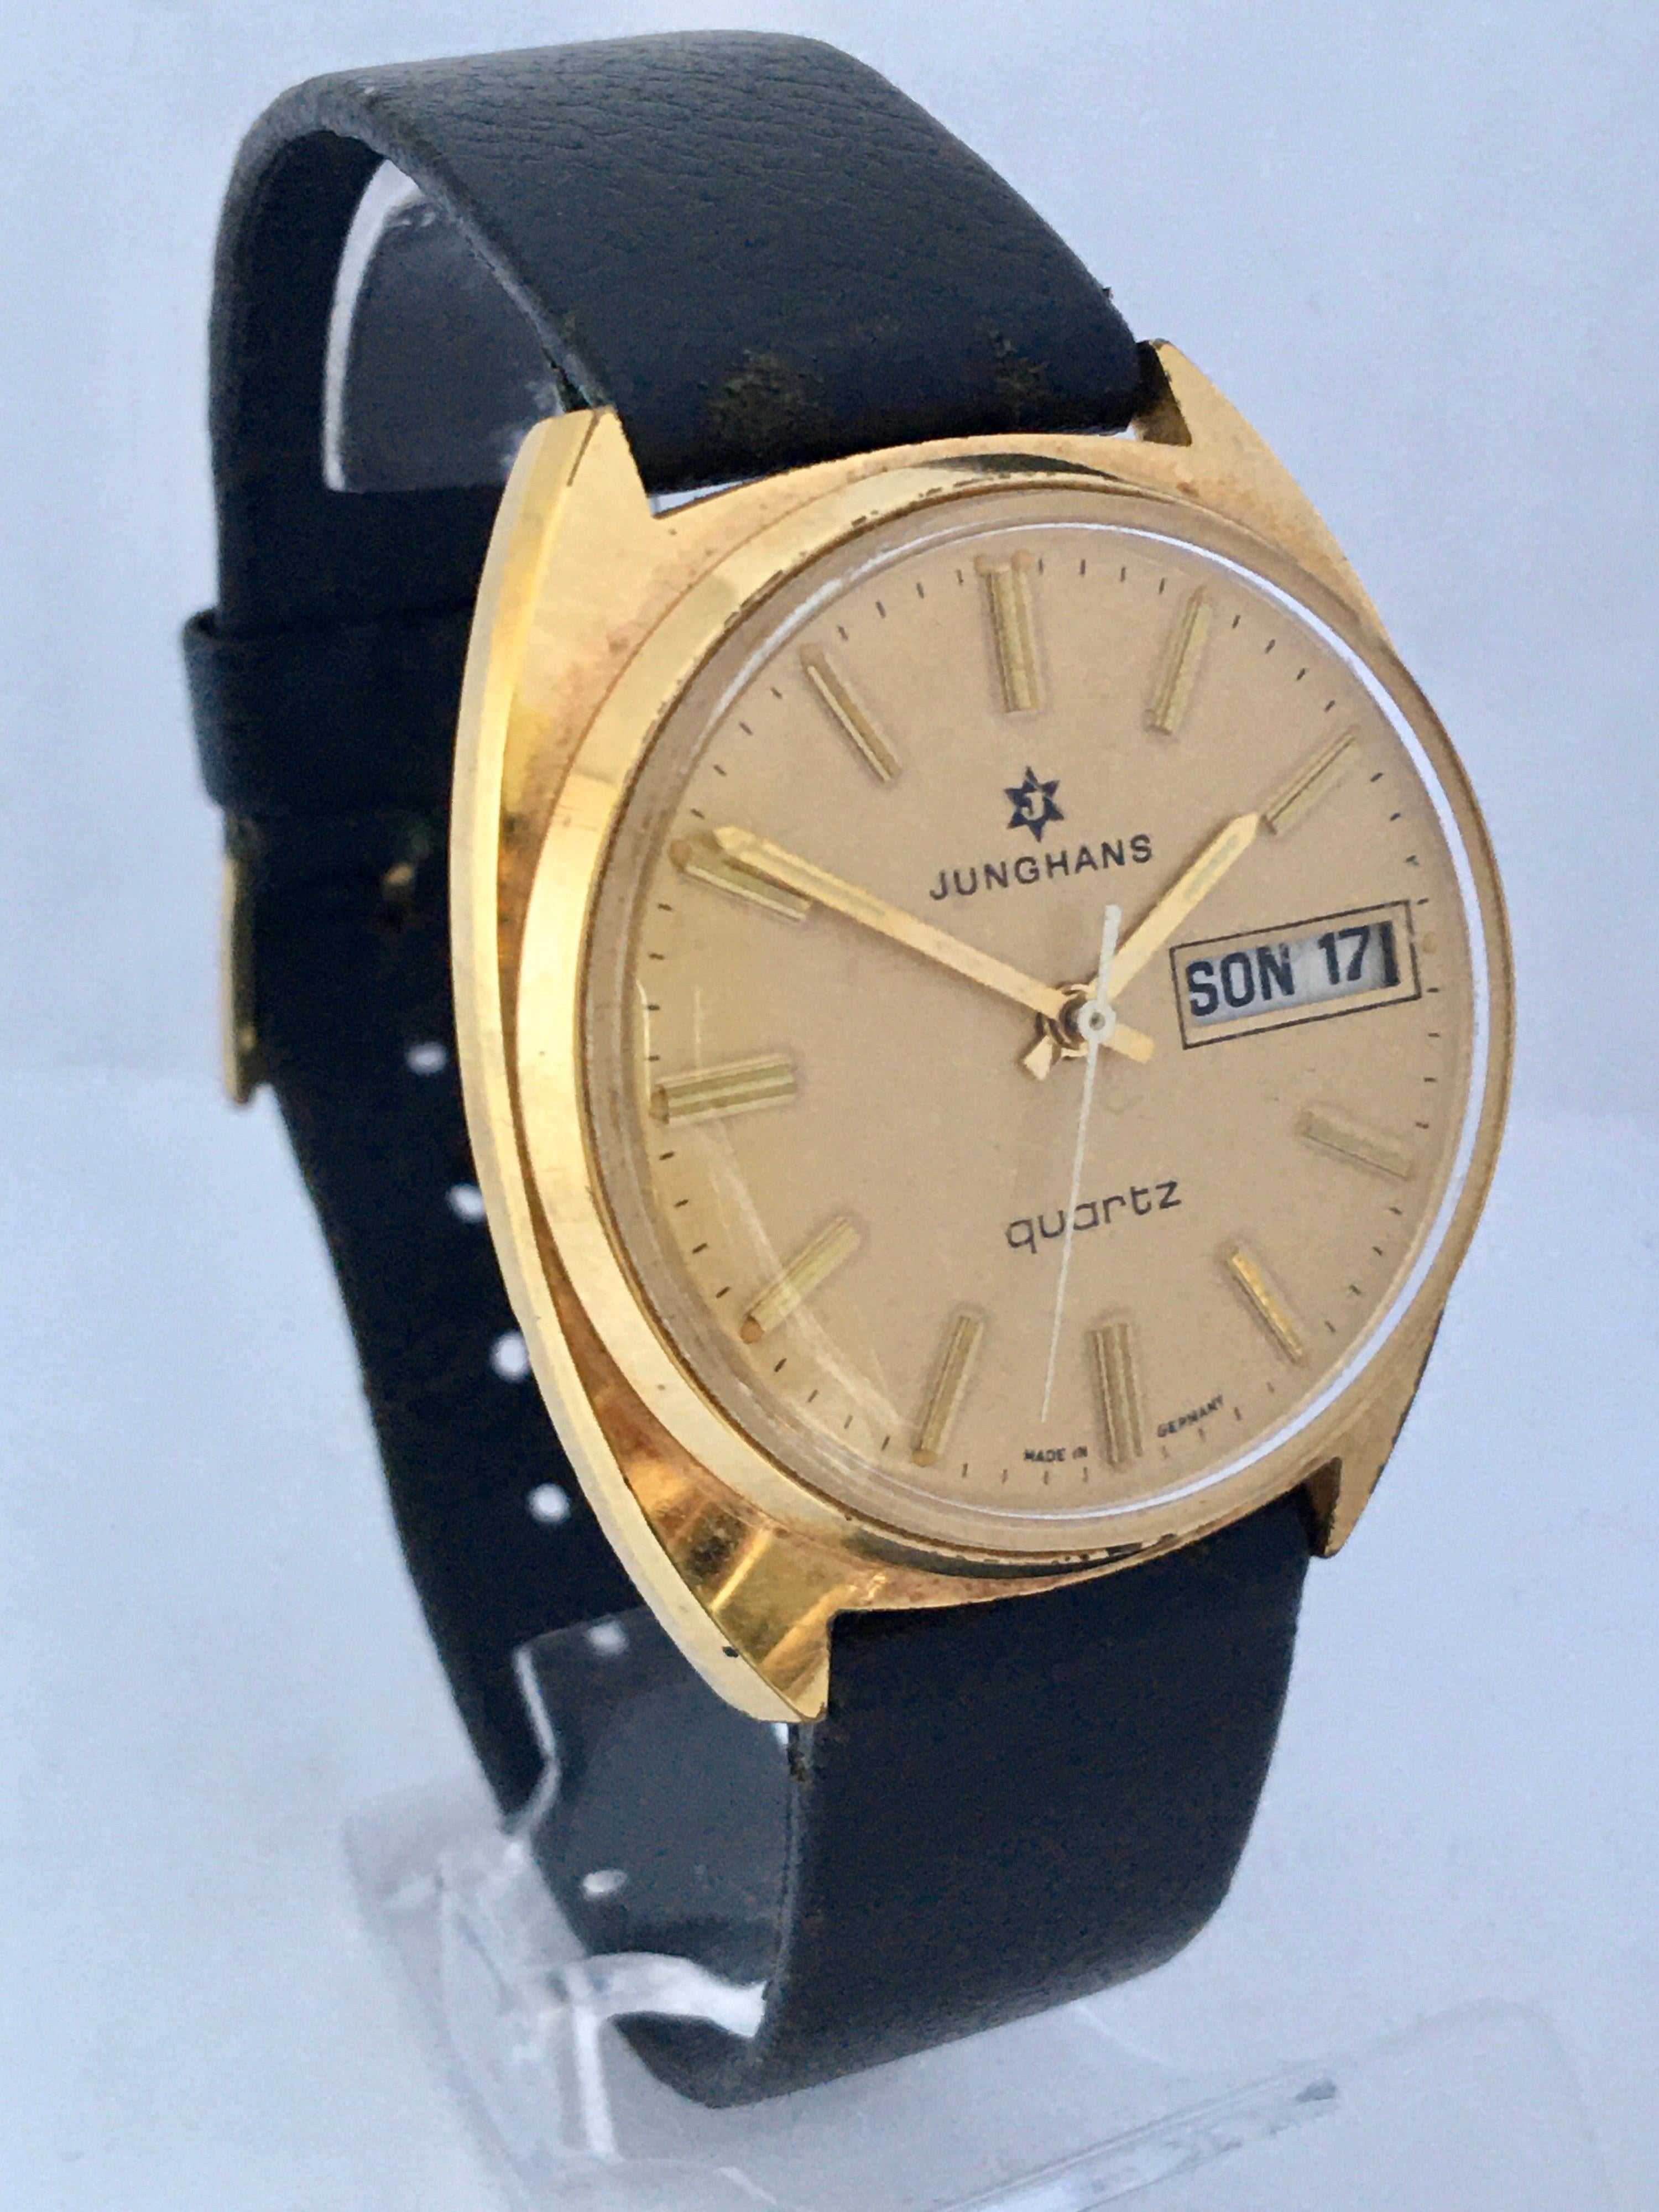 This charming pre-owned vintage battery operated watch is in good working condition and it is running well. Visible signs of wear and ageing with slight scratches on the glass and some tarnished on gold plated watch case as shown.

please study the